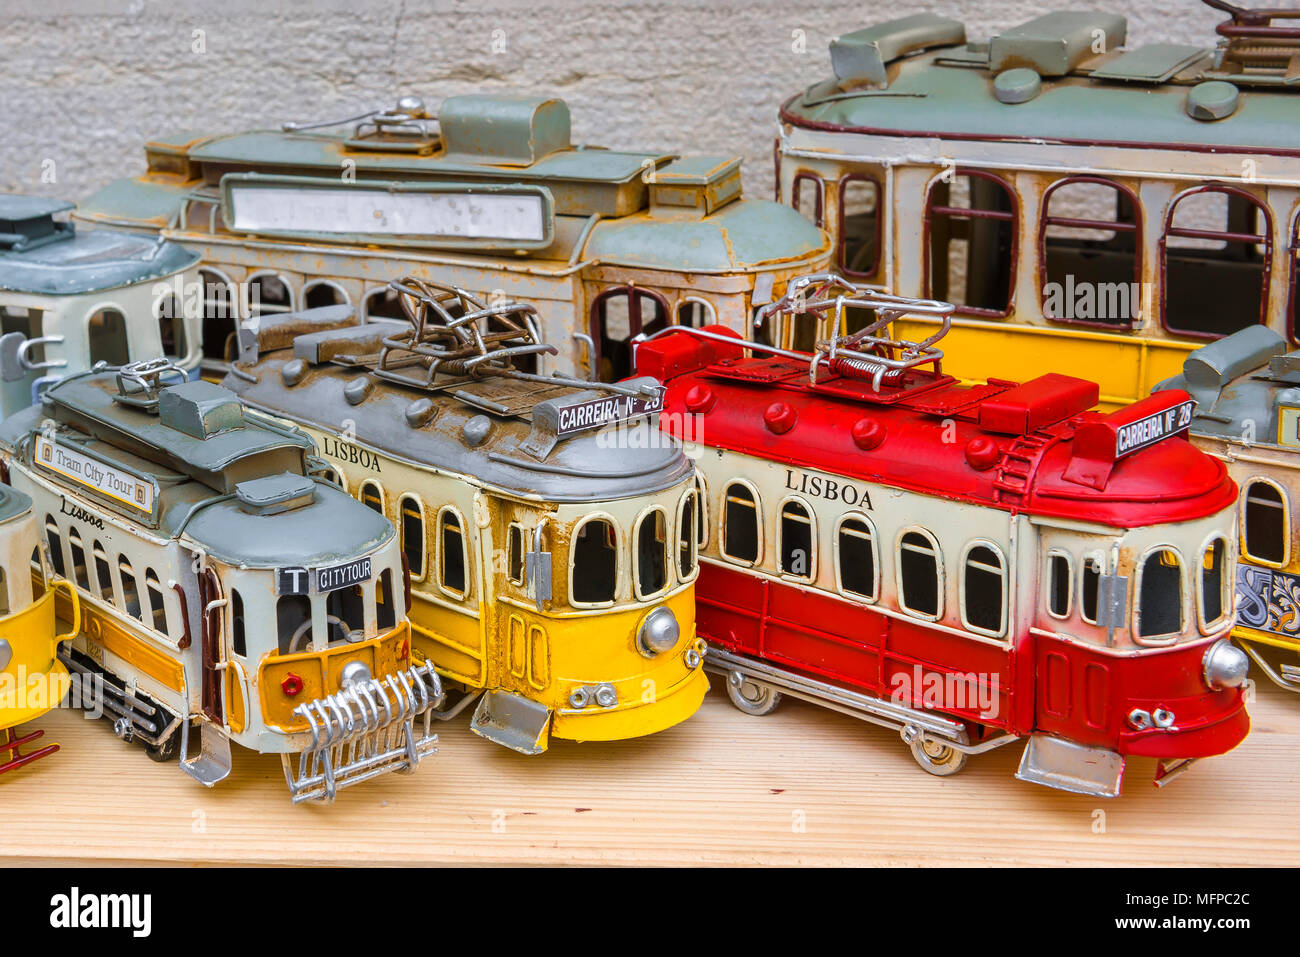 Tram Portugal, view of souvenir toy trams for sale in Lisbon, Portugal. Stock Photo